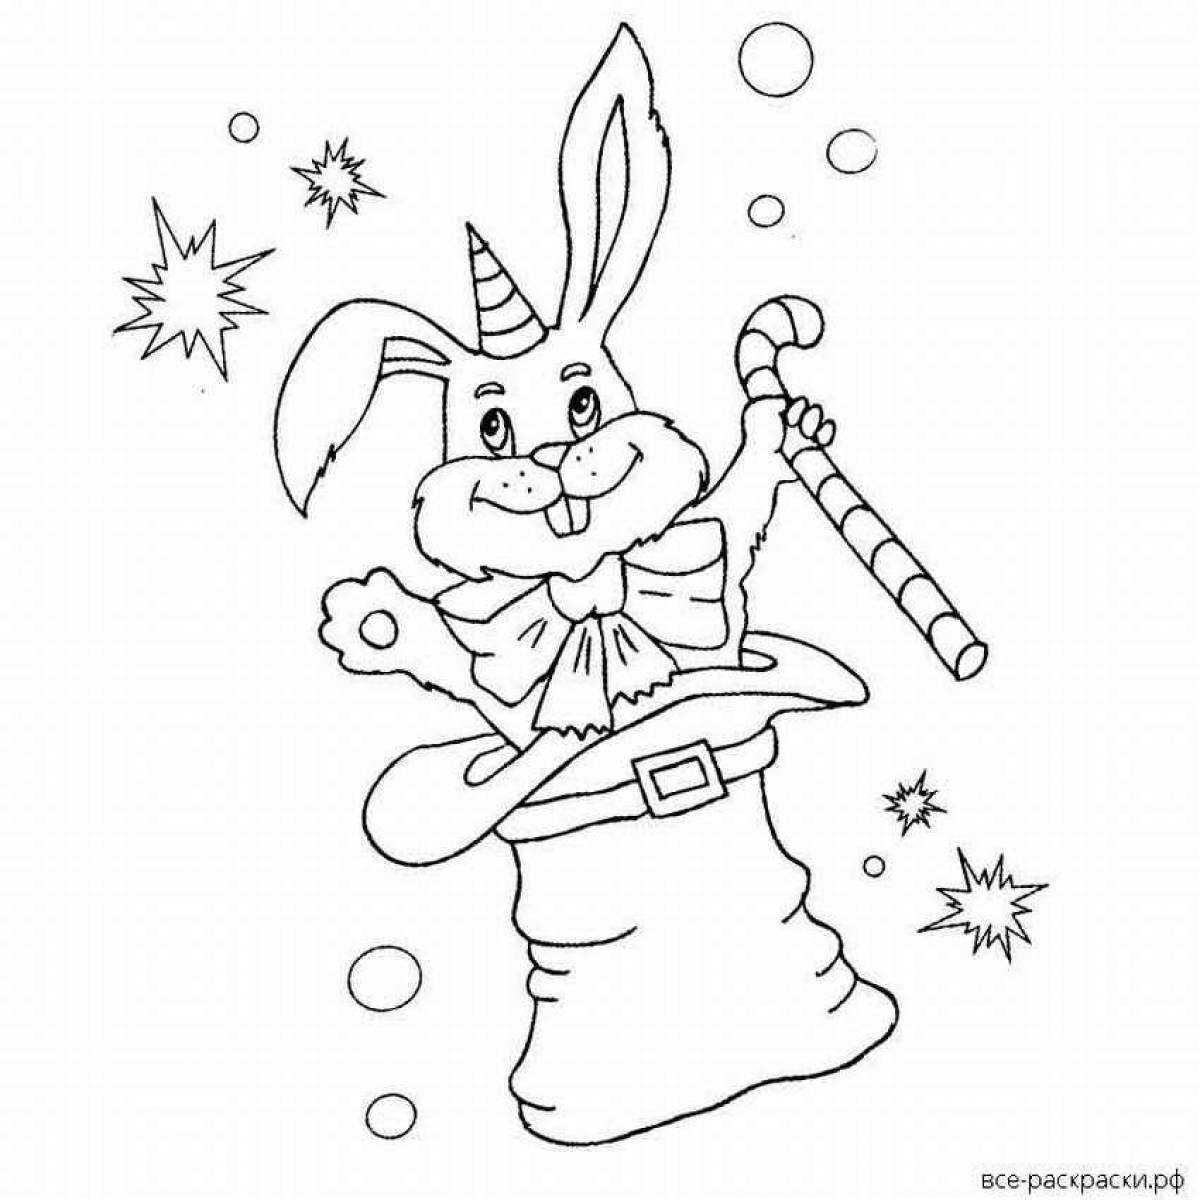 Great coloring hare 2023 new year